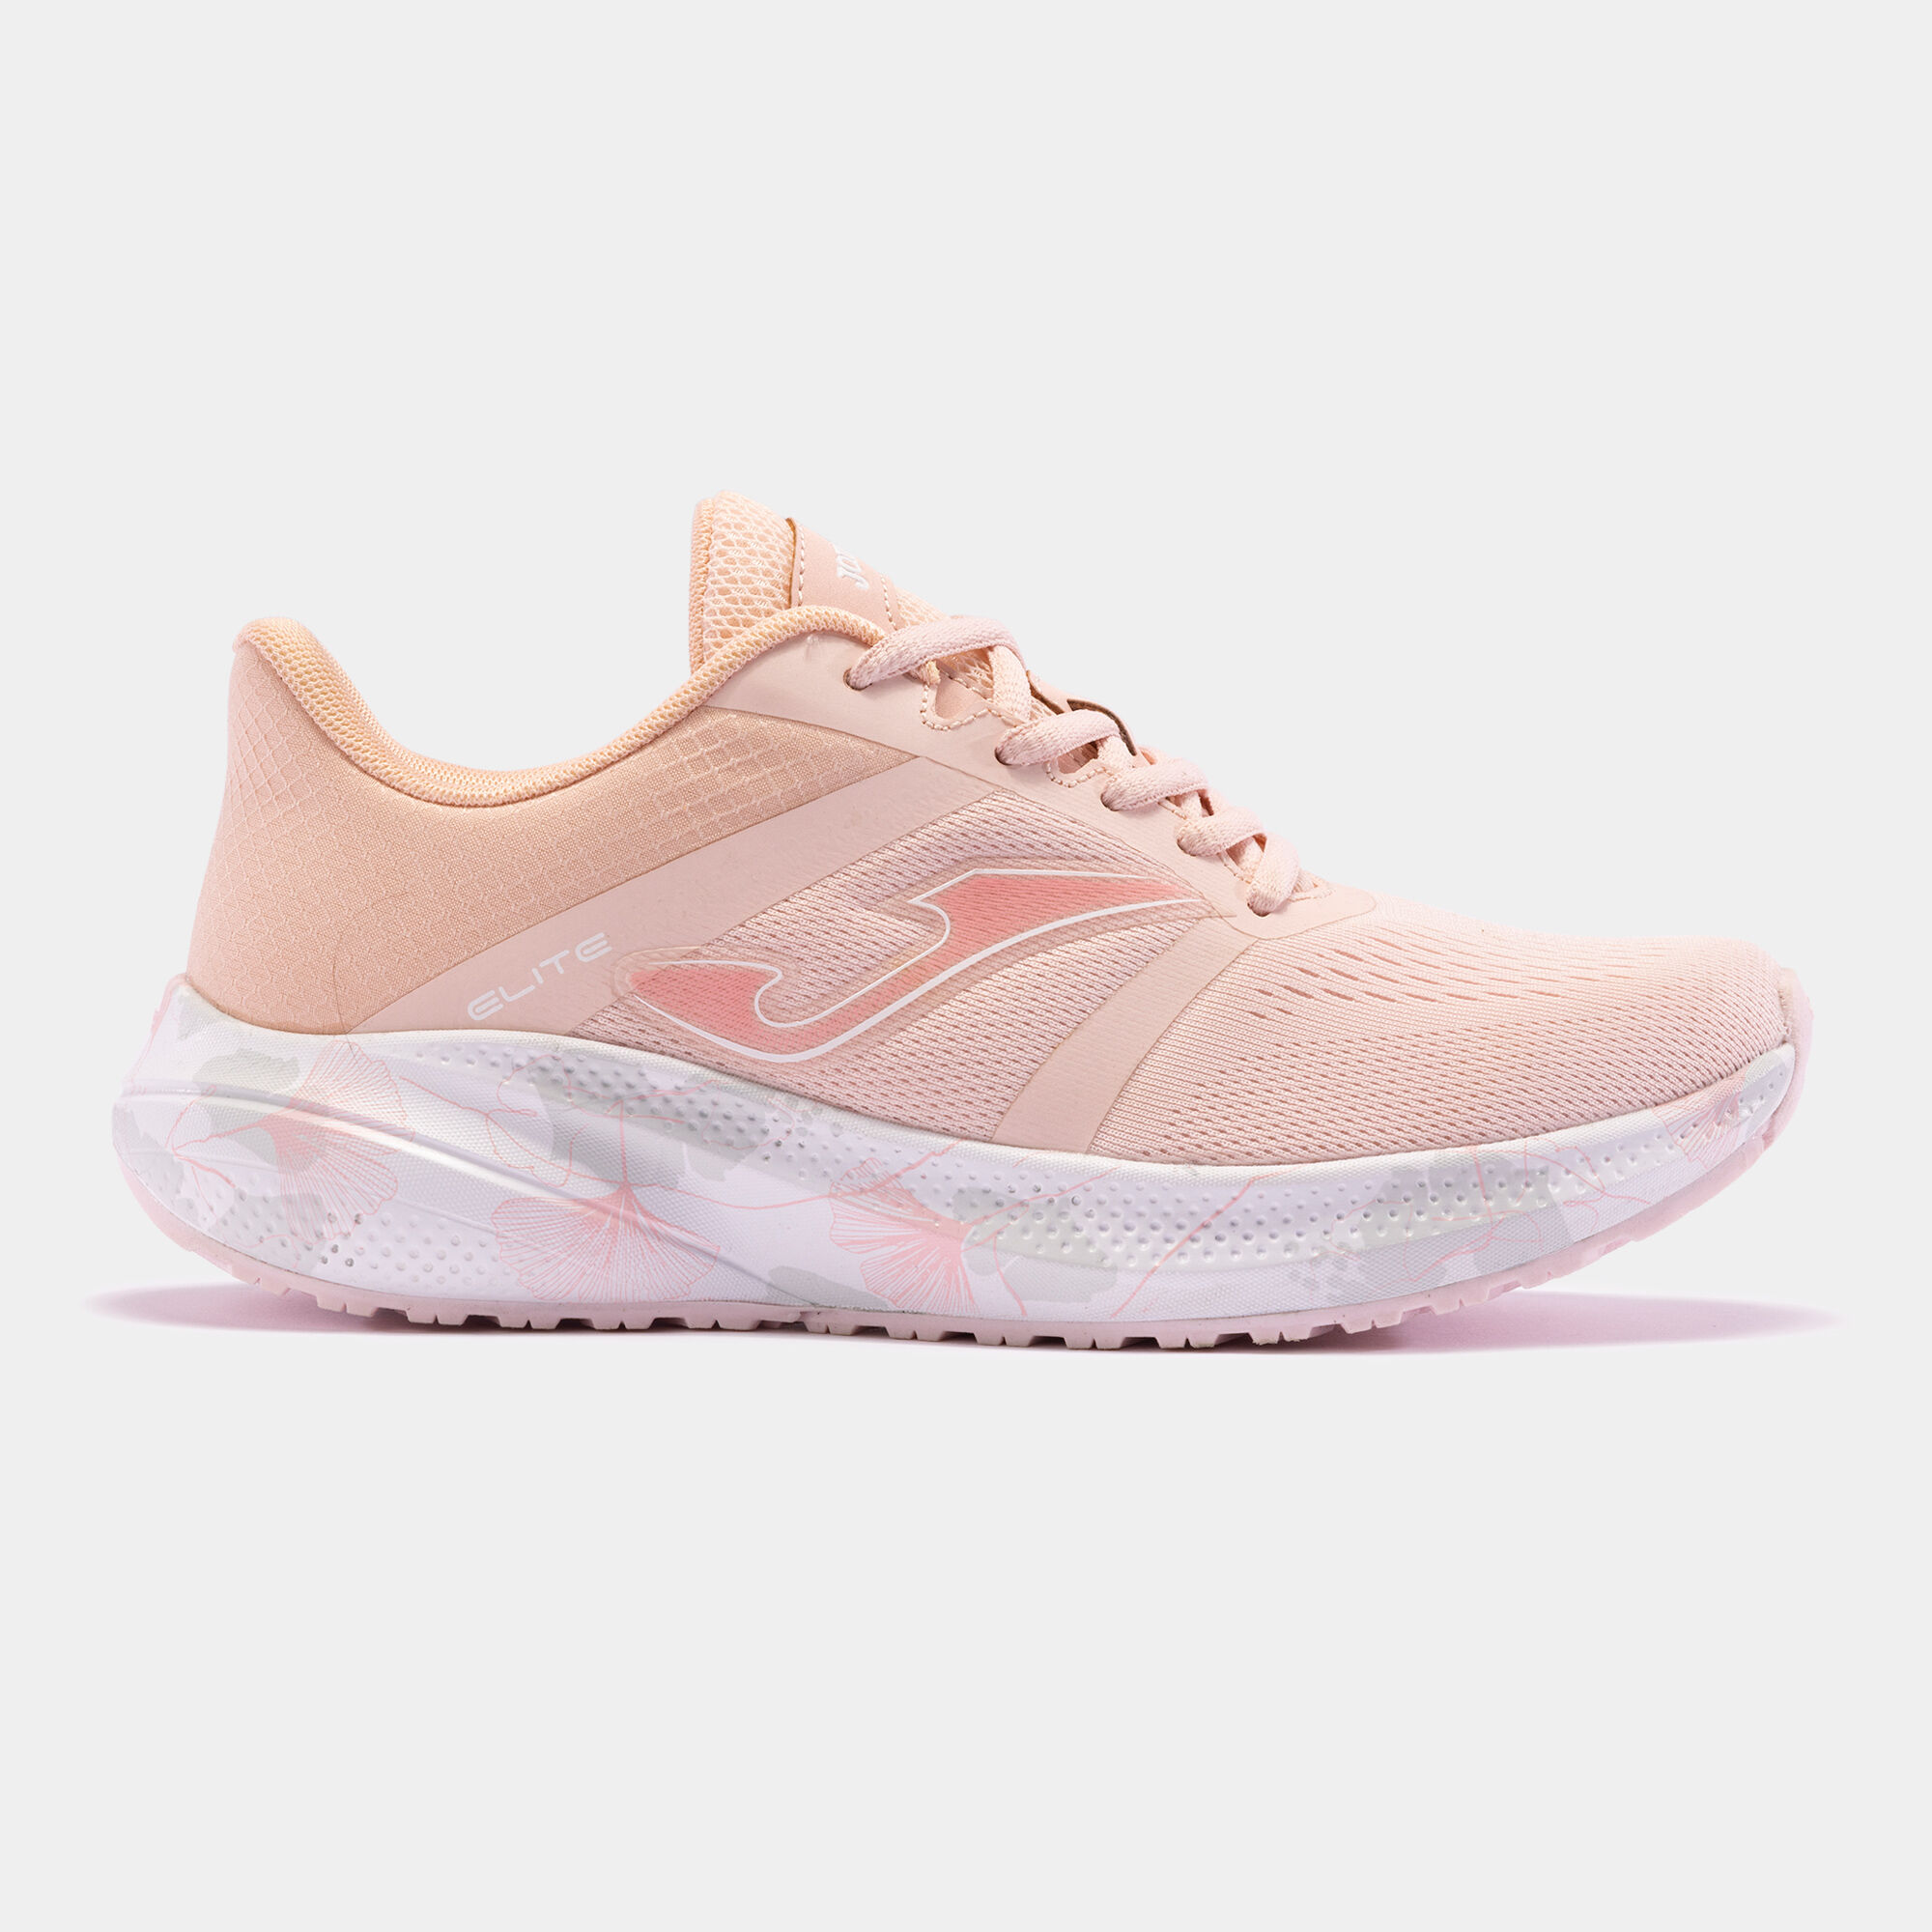 Running shoes Elite Lady 24 woman pink